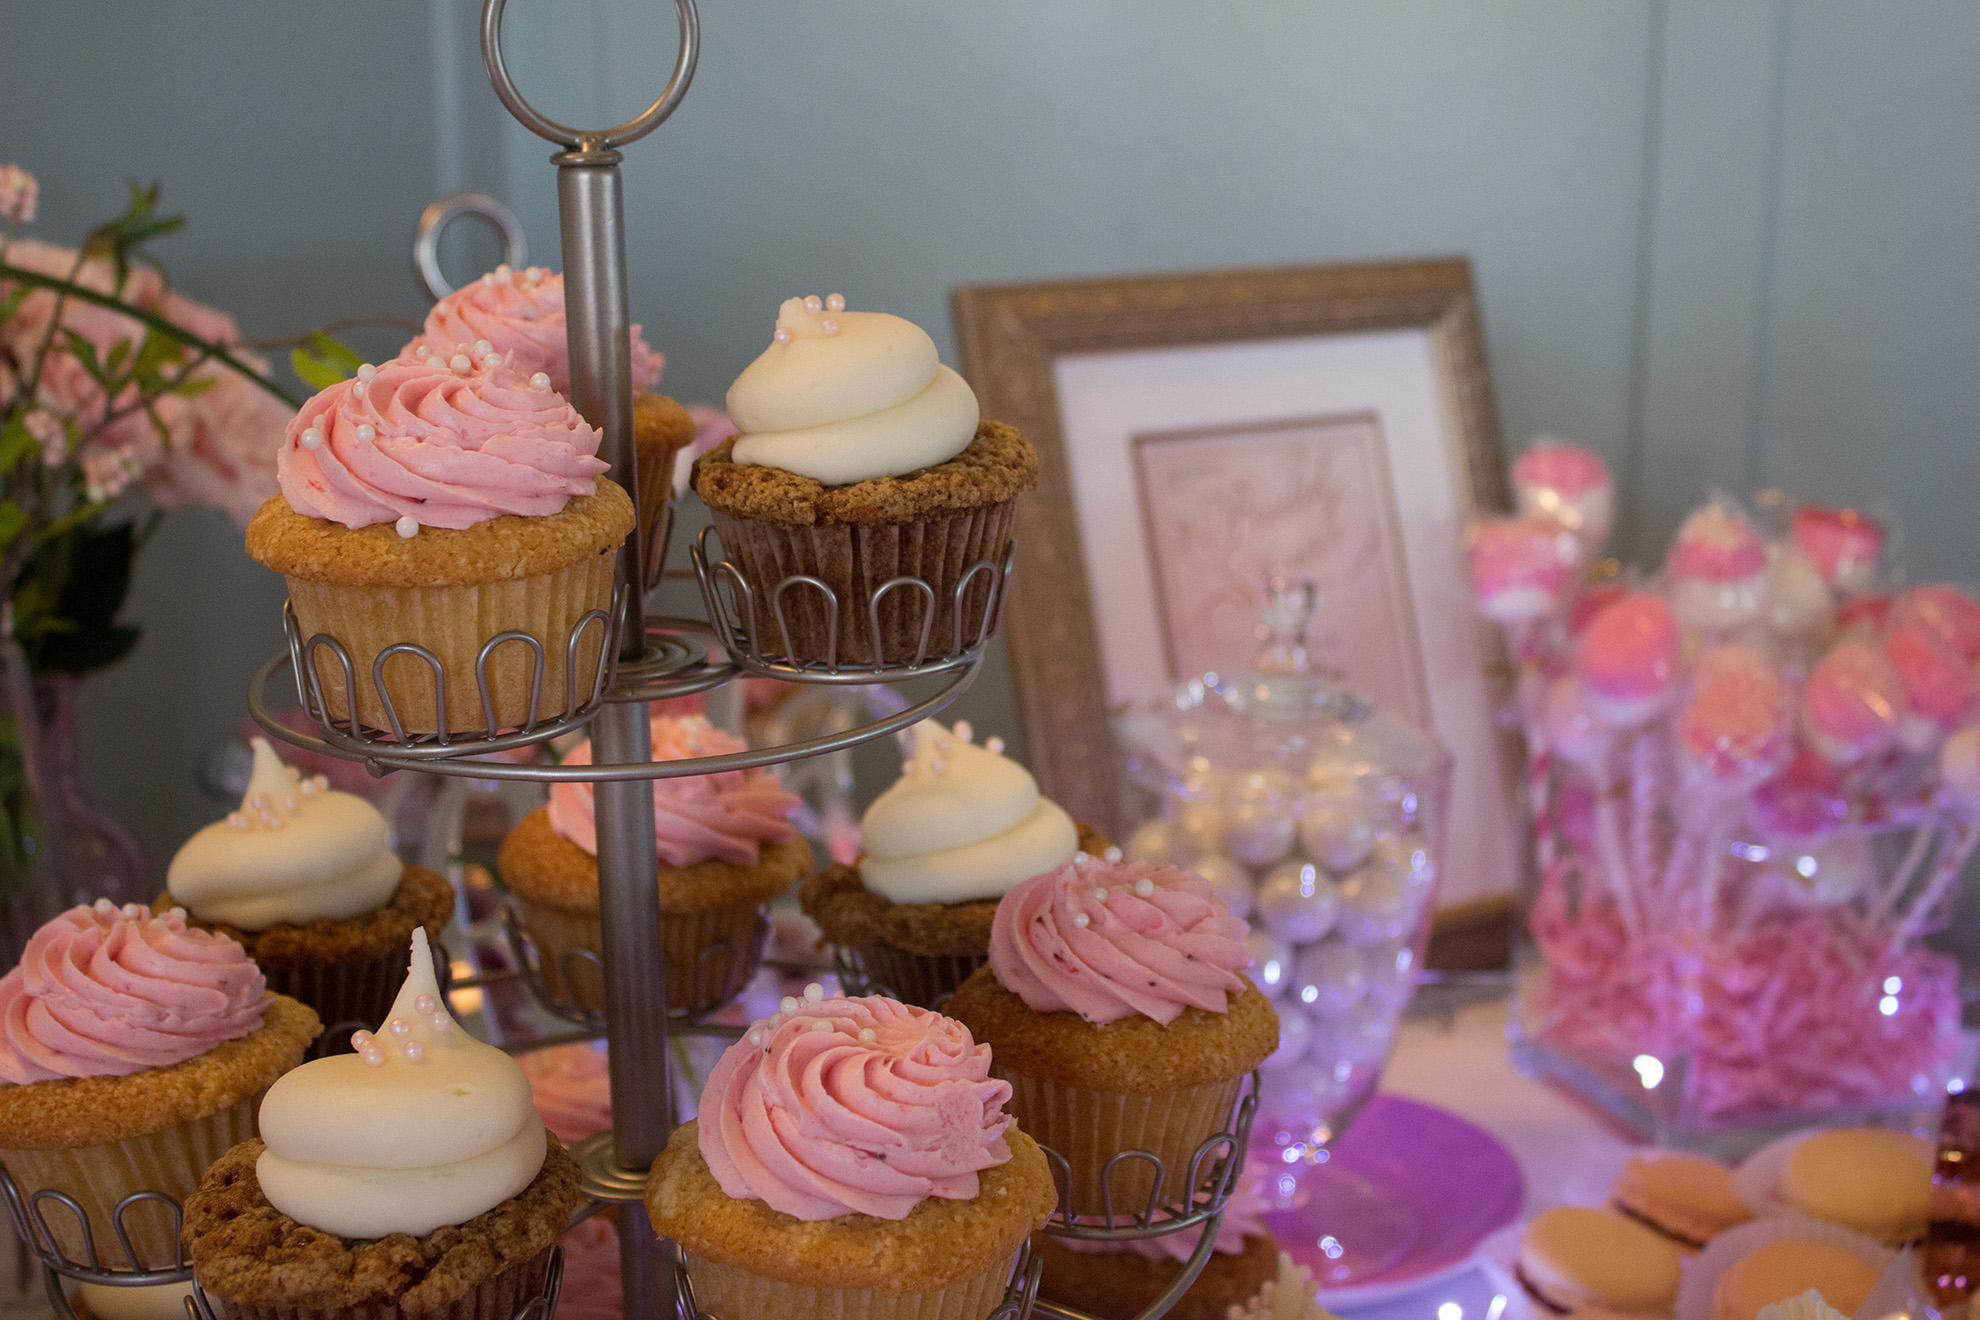 three tiered cupcake stand with pink and white frosted cupcakes and other assorted pink treats in the background